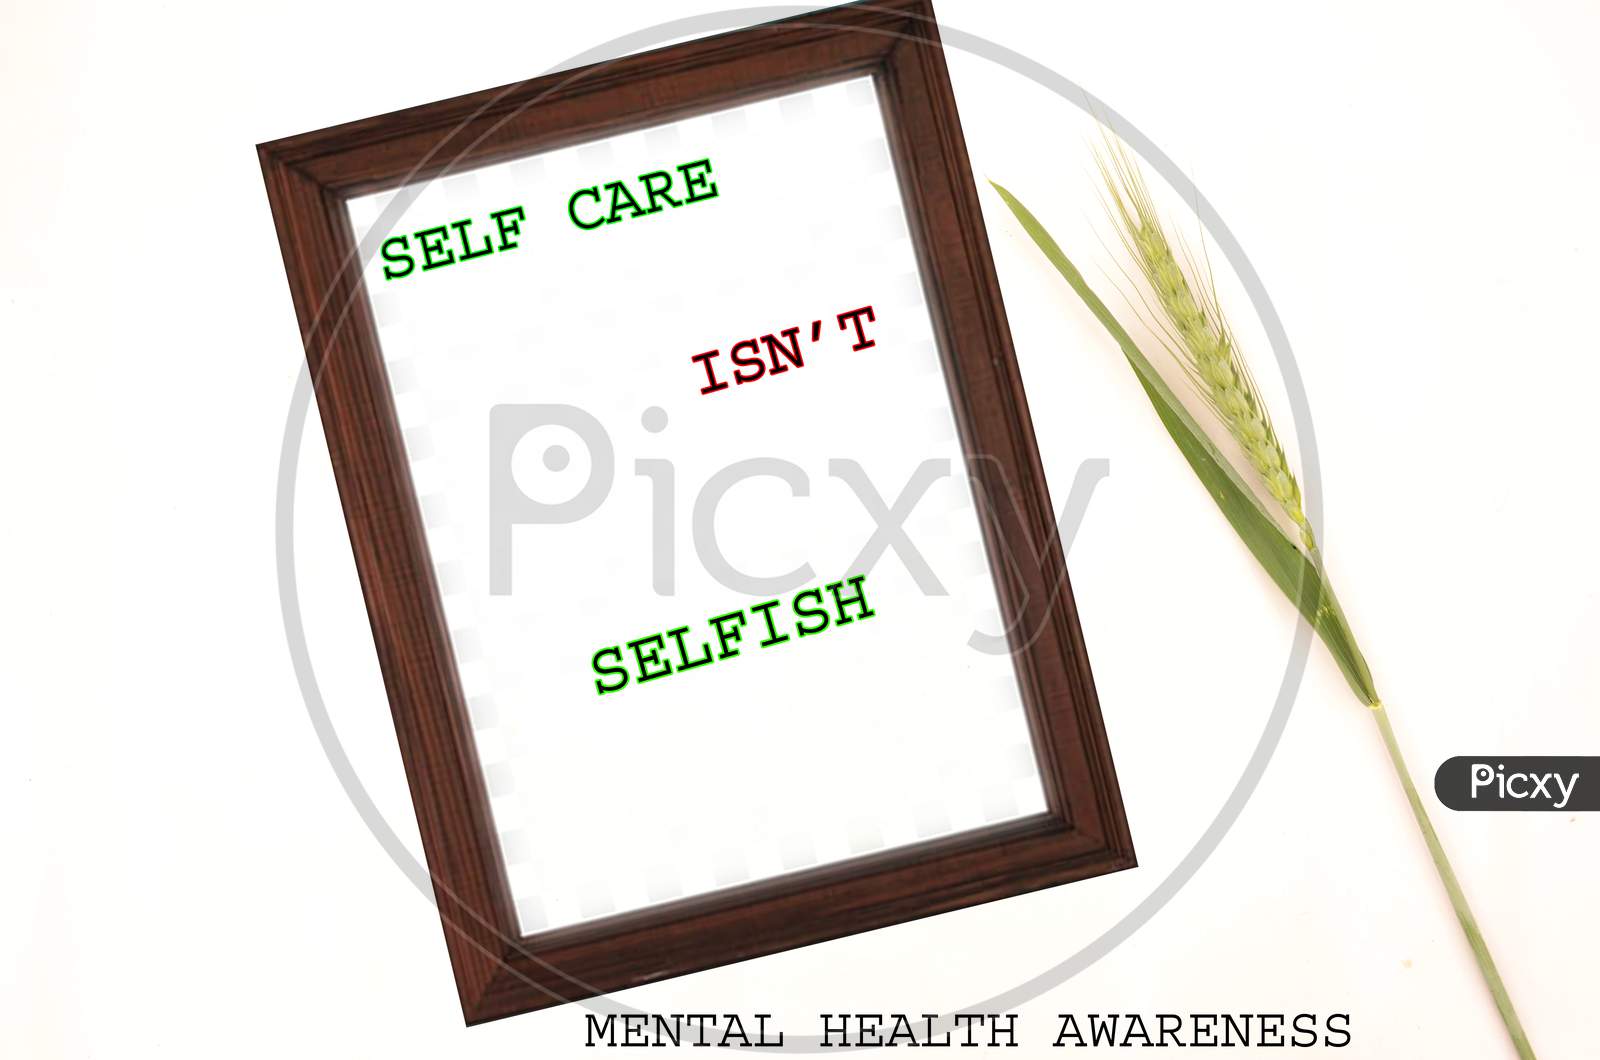 Self Care Is N'T Selfish Concept Mental Health Awareness With Green Plant On The White Background.